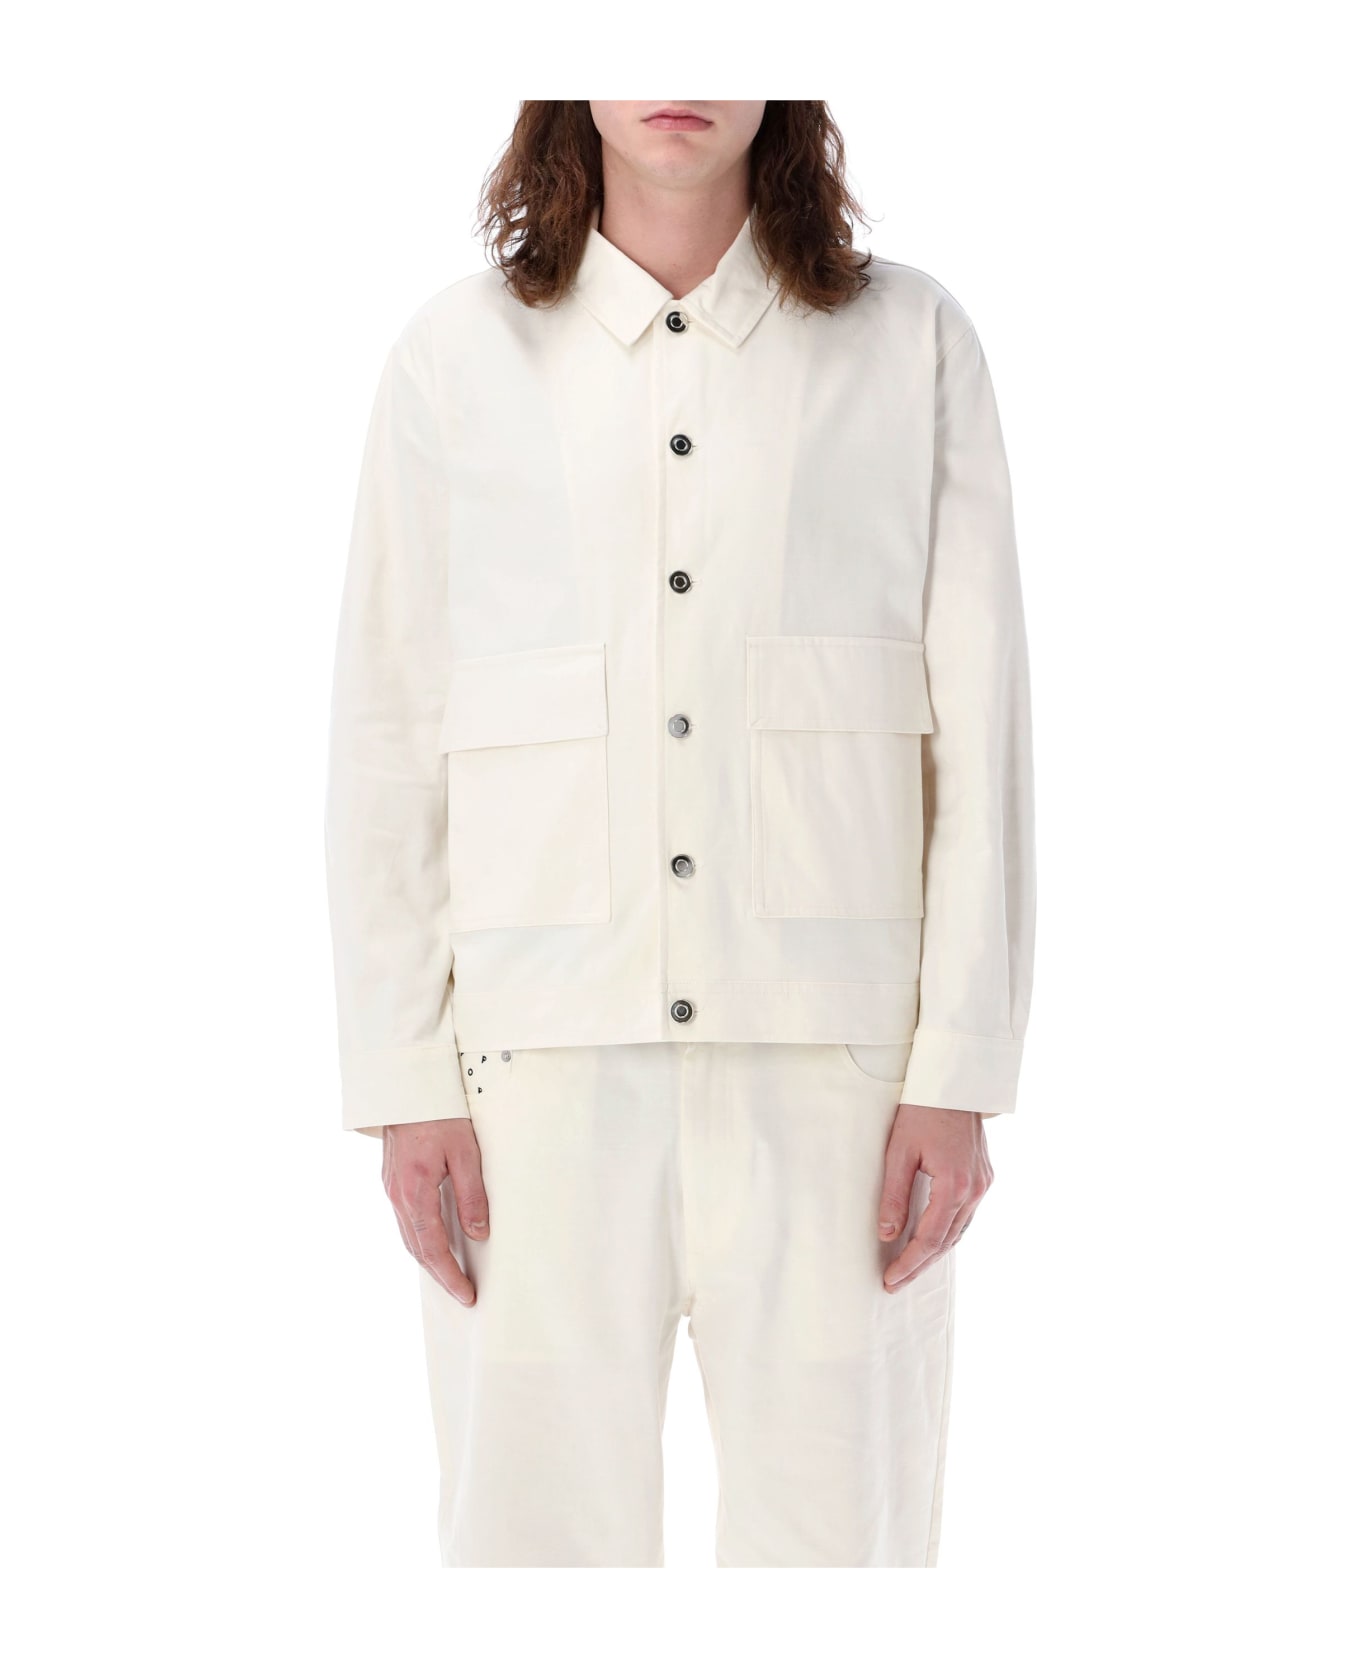 Pop Trading Company Pop Full Button Jacket - OFFWHITE